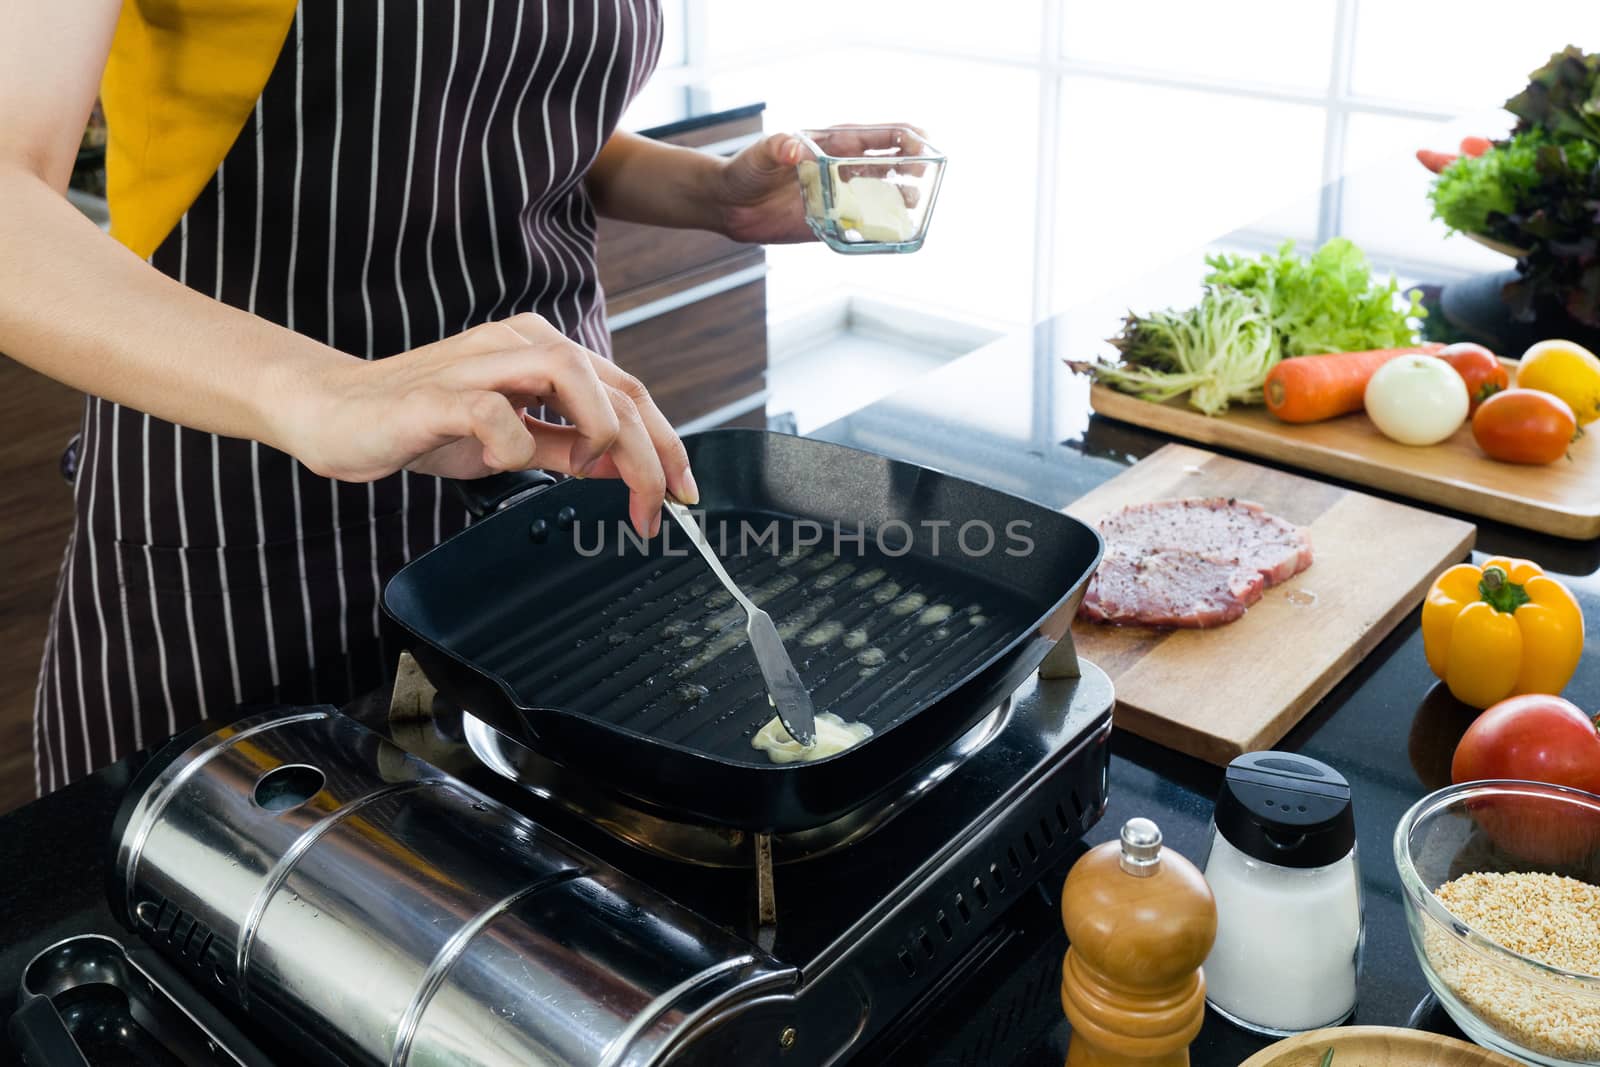 The housewife dressed in an apron putting butter in the pan prepared for frying steaks.